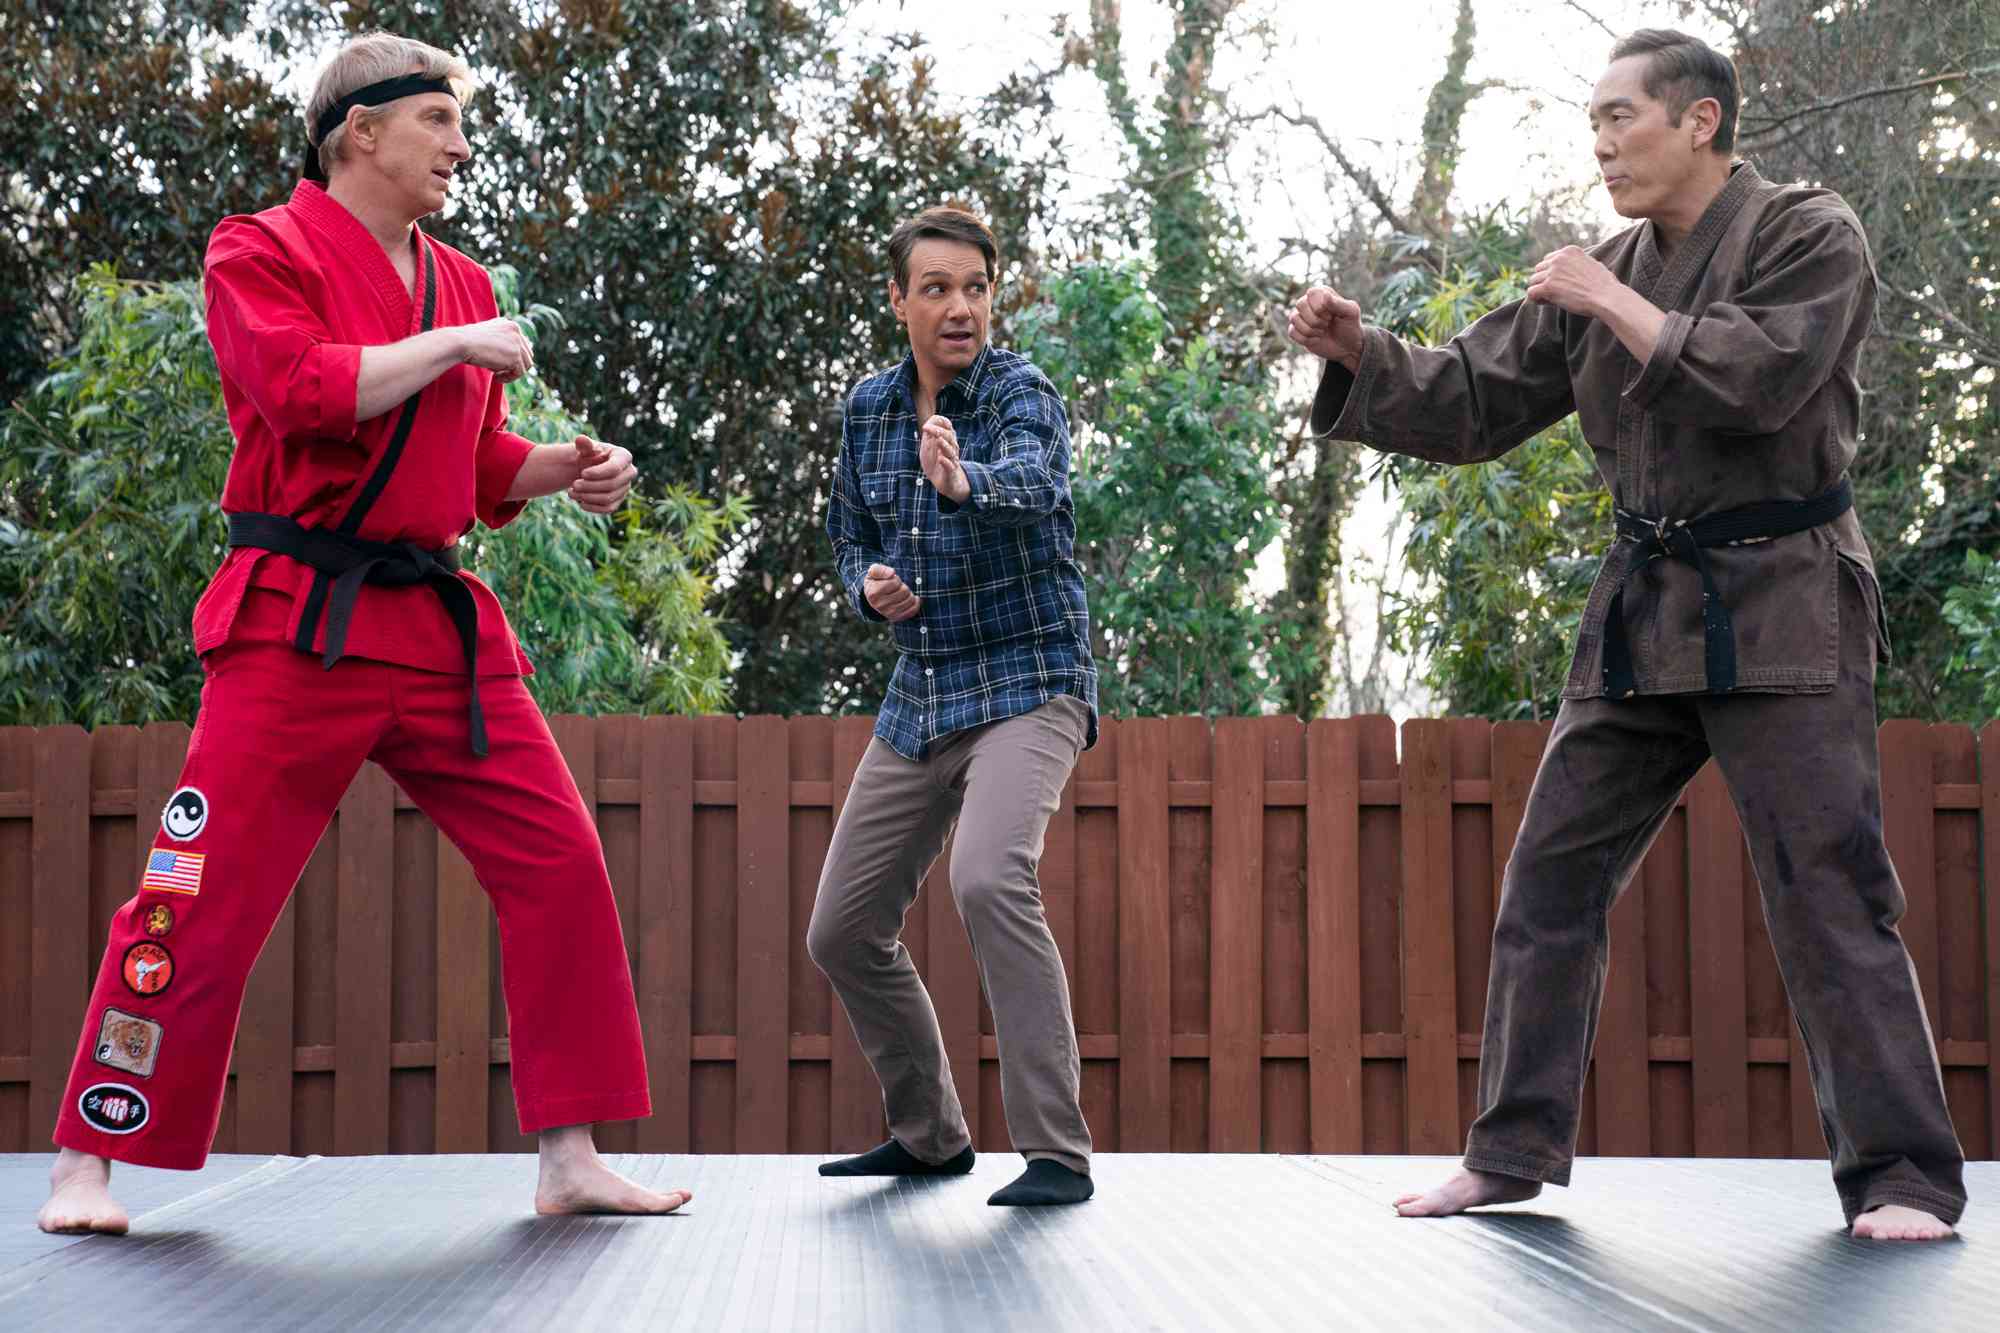 ‘Cobra Kai‘ Stars Ralph Macchio and William Zabka Still Do Karate to Stay Fit: ‘You’re Never Too Old for Anything’ (Exclusive)